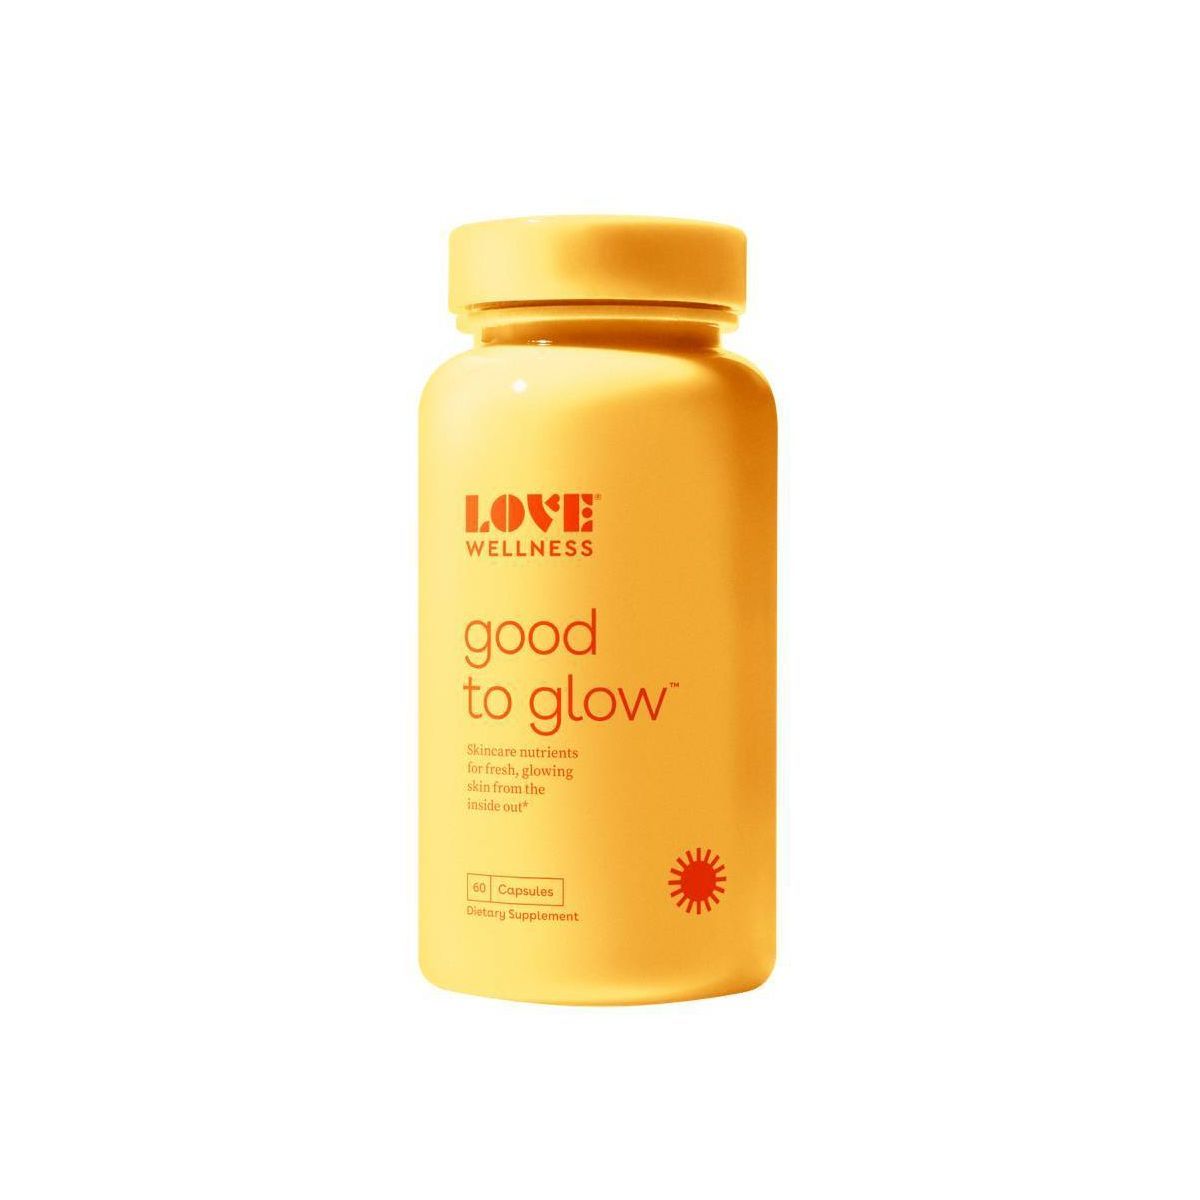 Love Wellness Good to Glow Dietary Supplements for Brighter and Glowing Skin - 60ct | Target